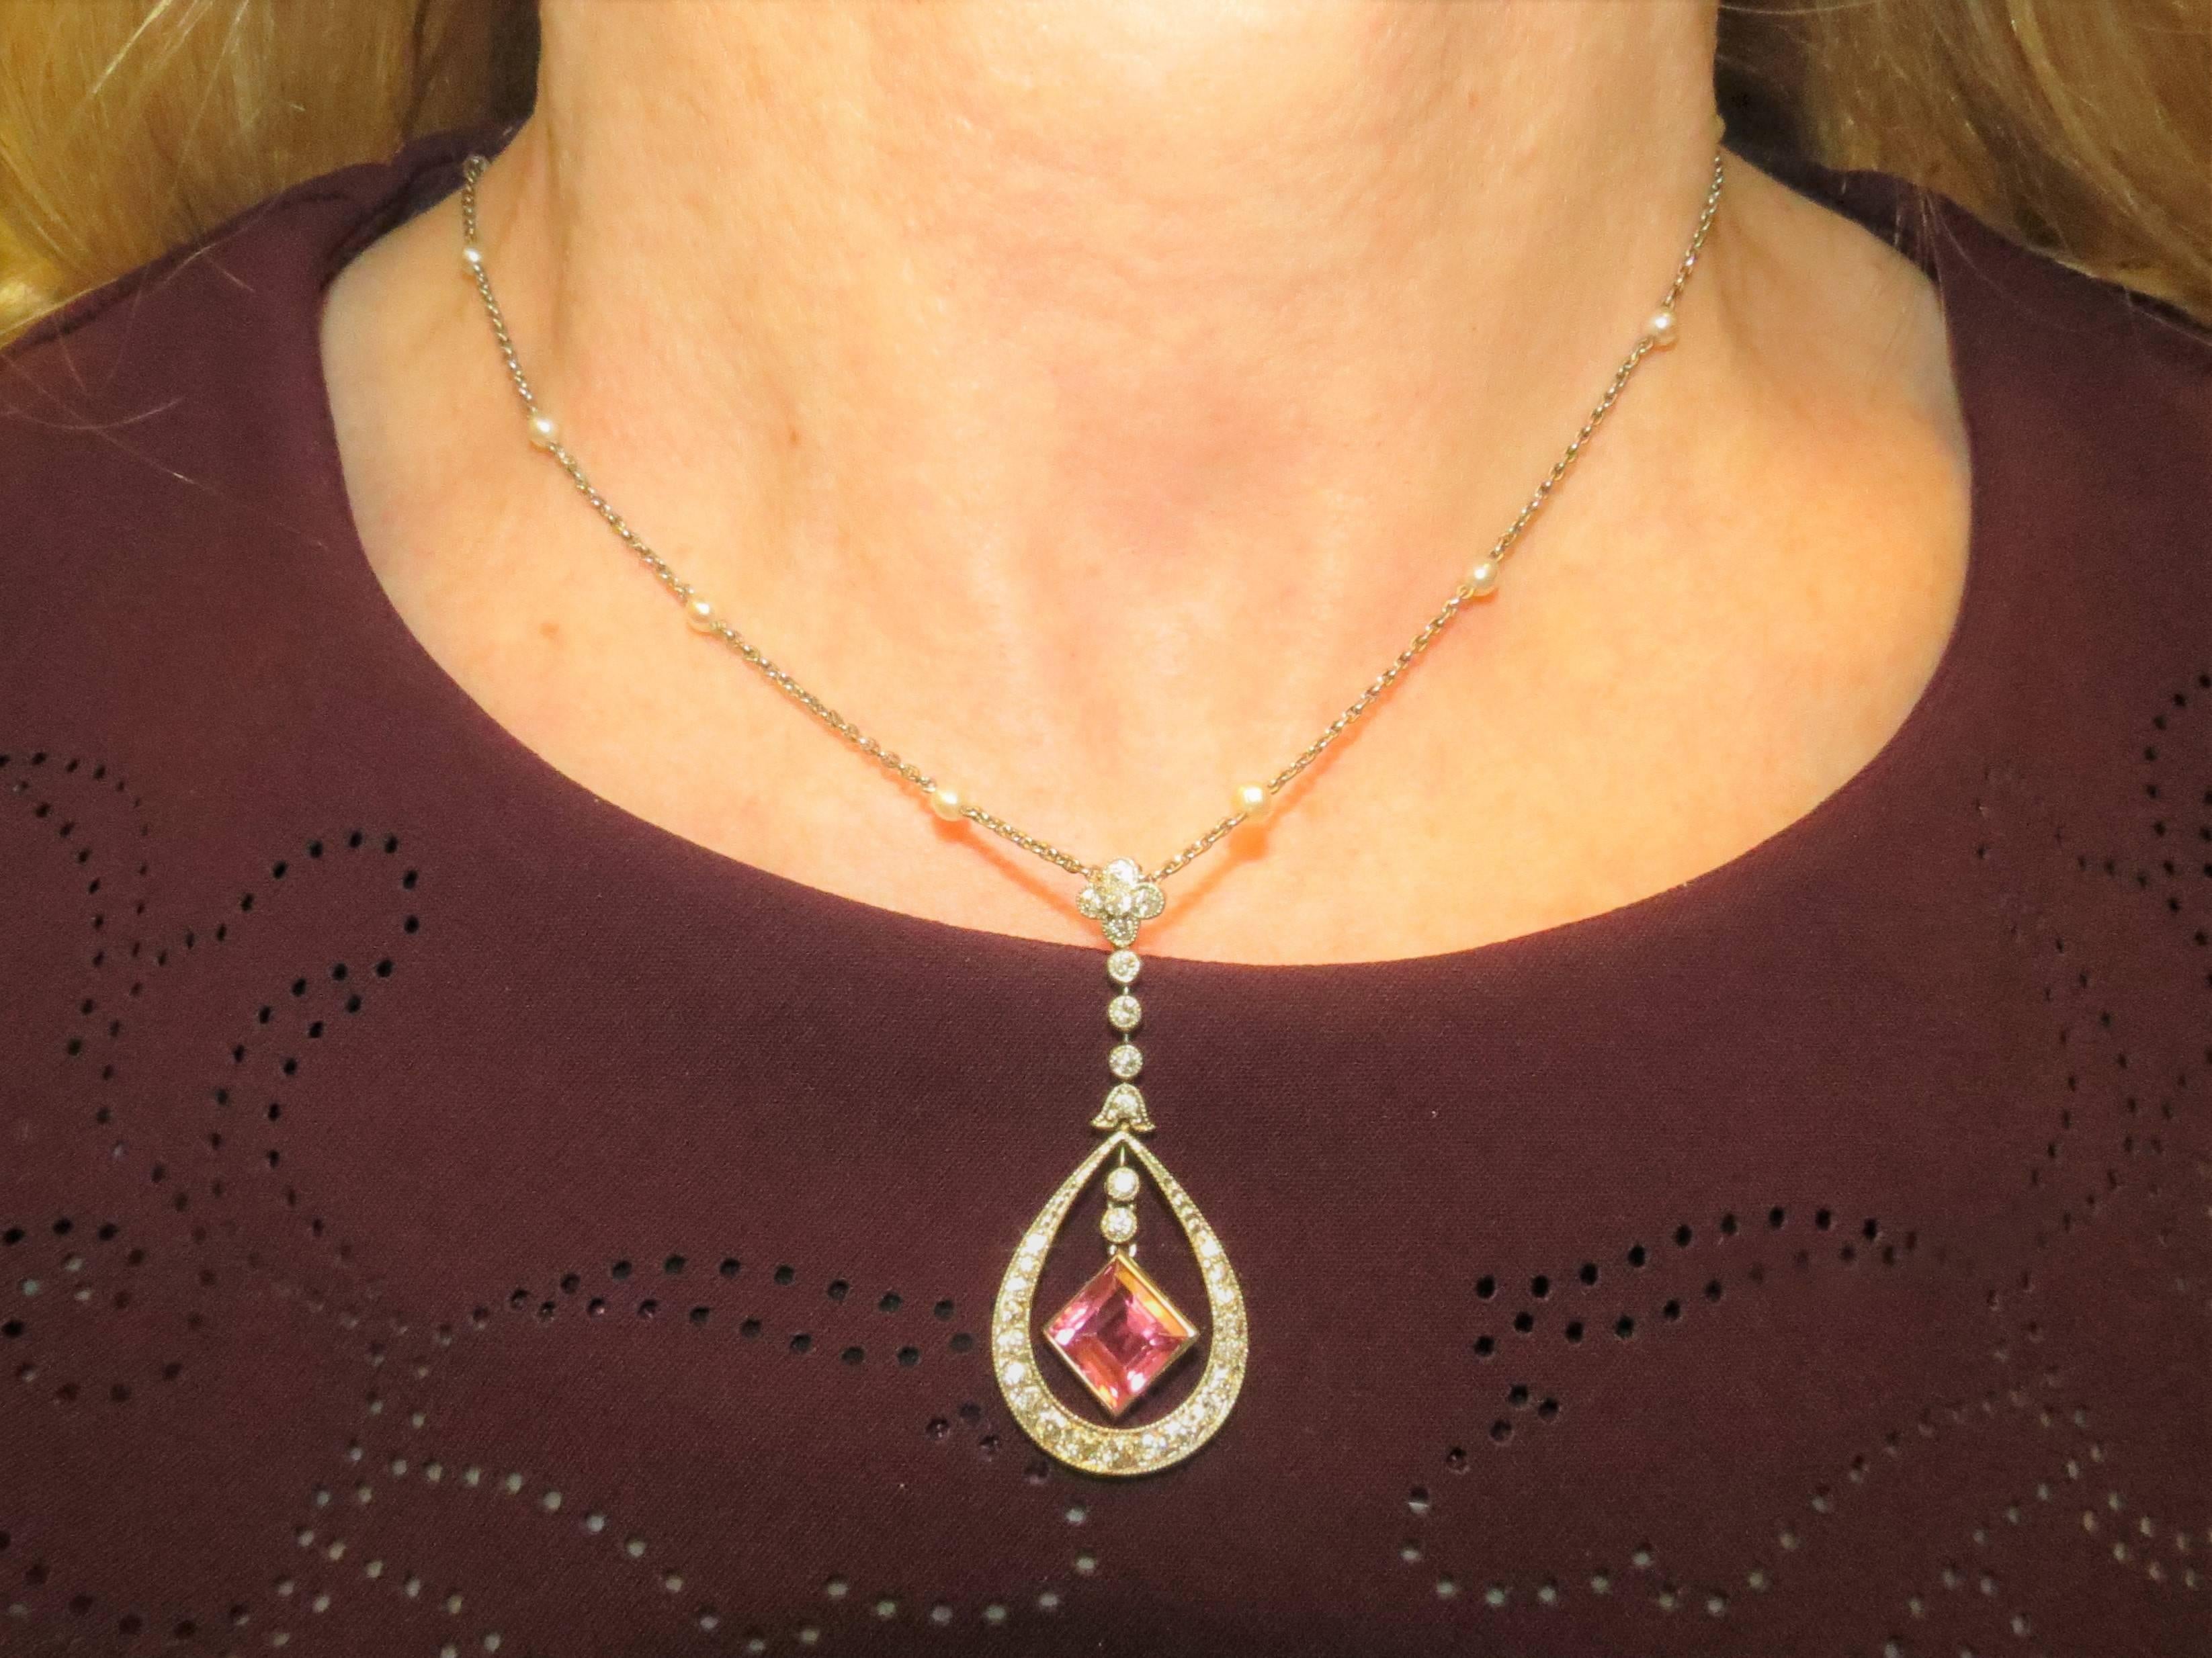 Old European Cut 18 Karat Gold Diamond and Pink Tourmaline Pendant Suspended from Pearl Chain